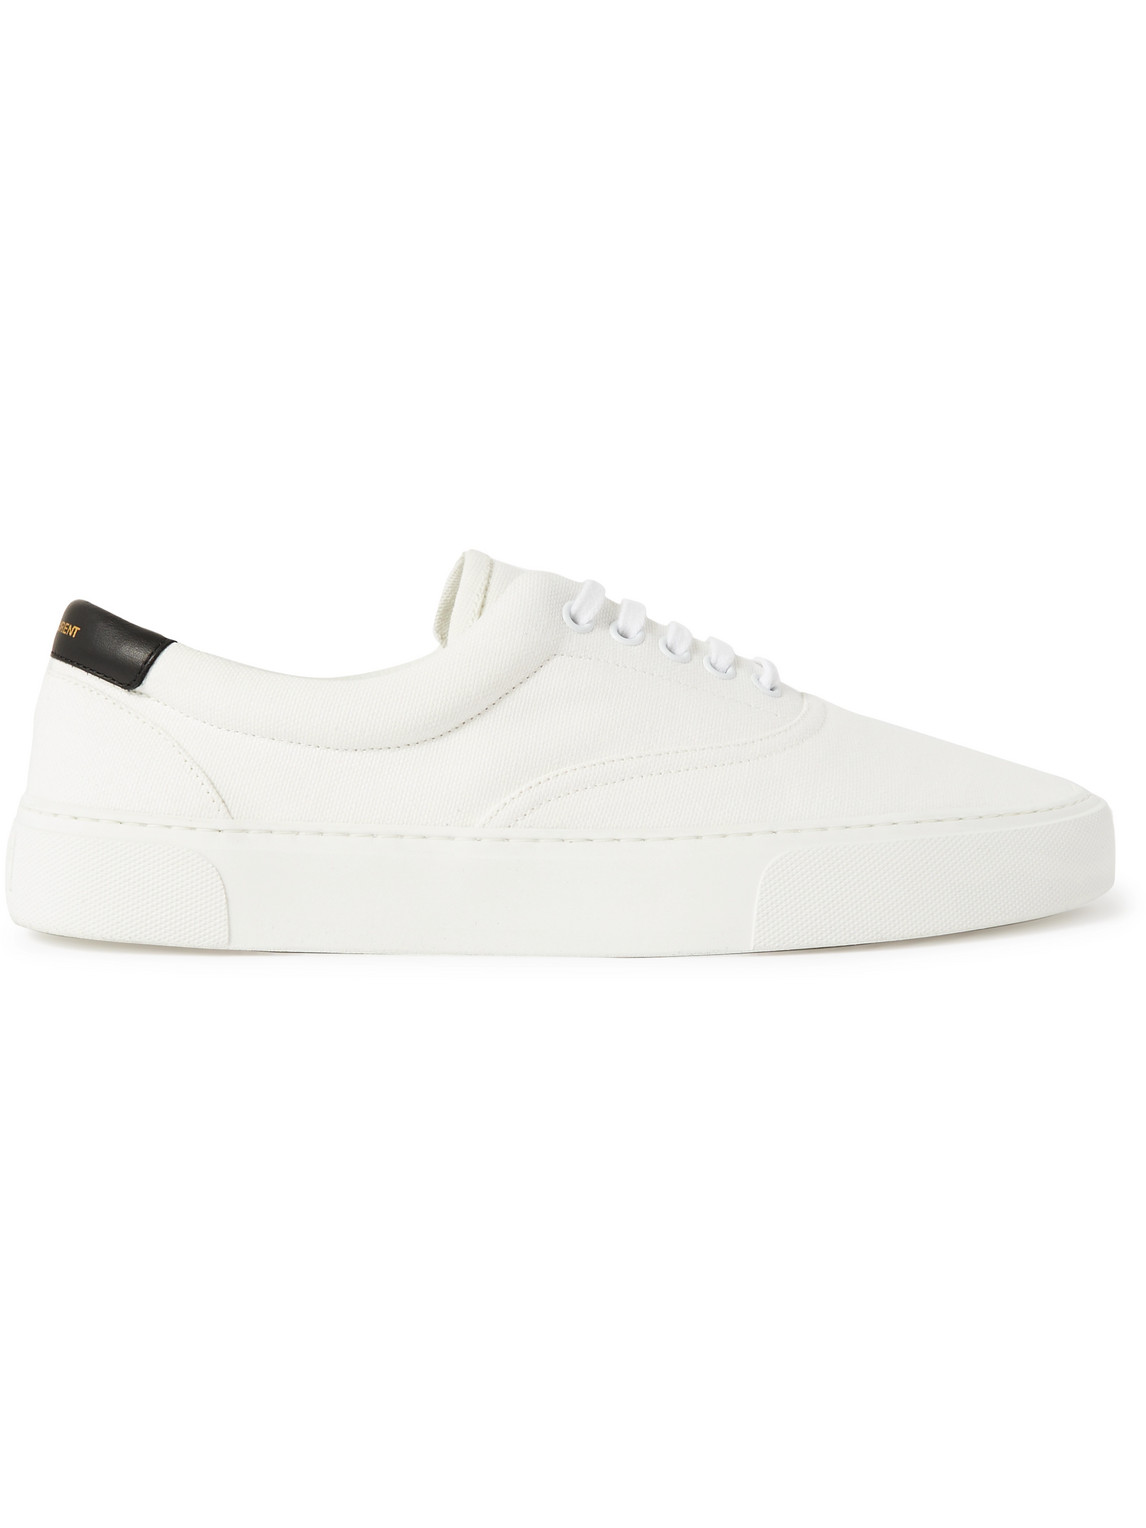 Venice Leather-Trimmed Cotton-Canvas Sneakers